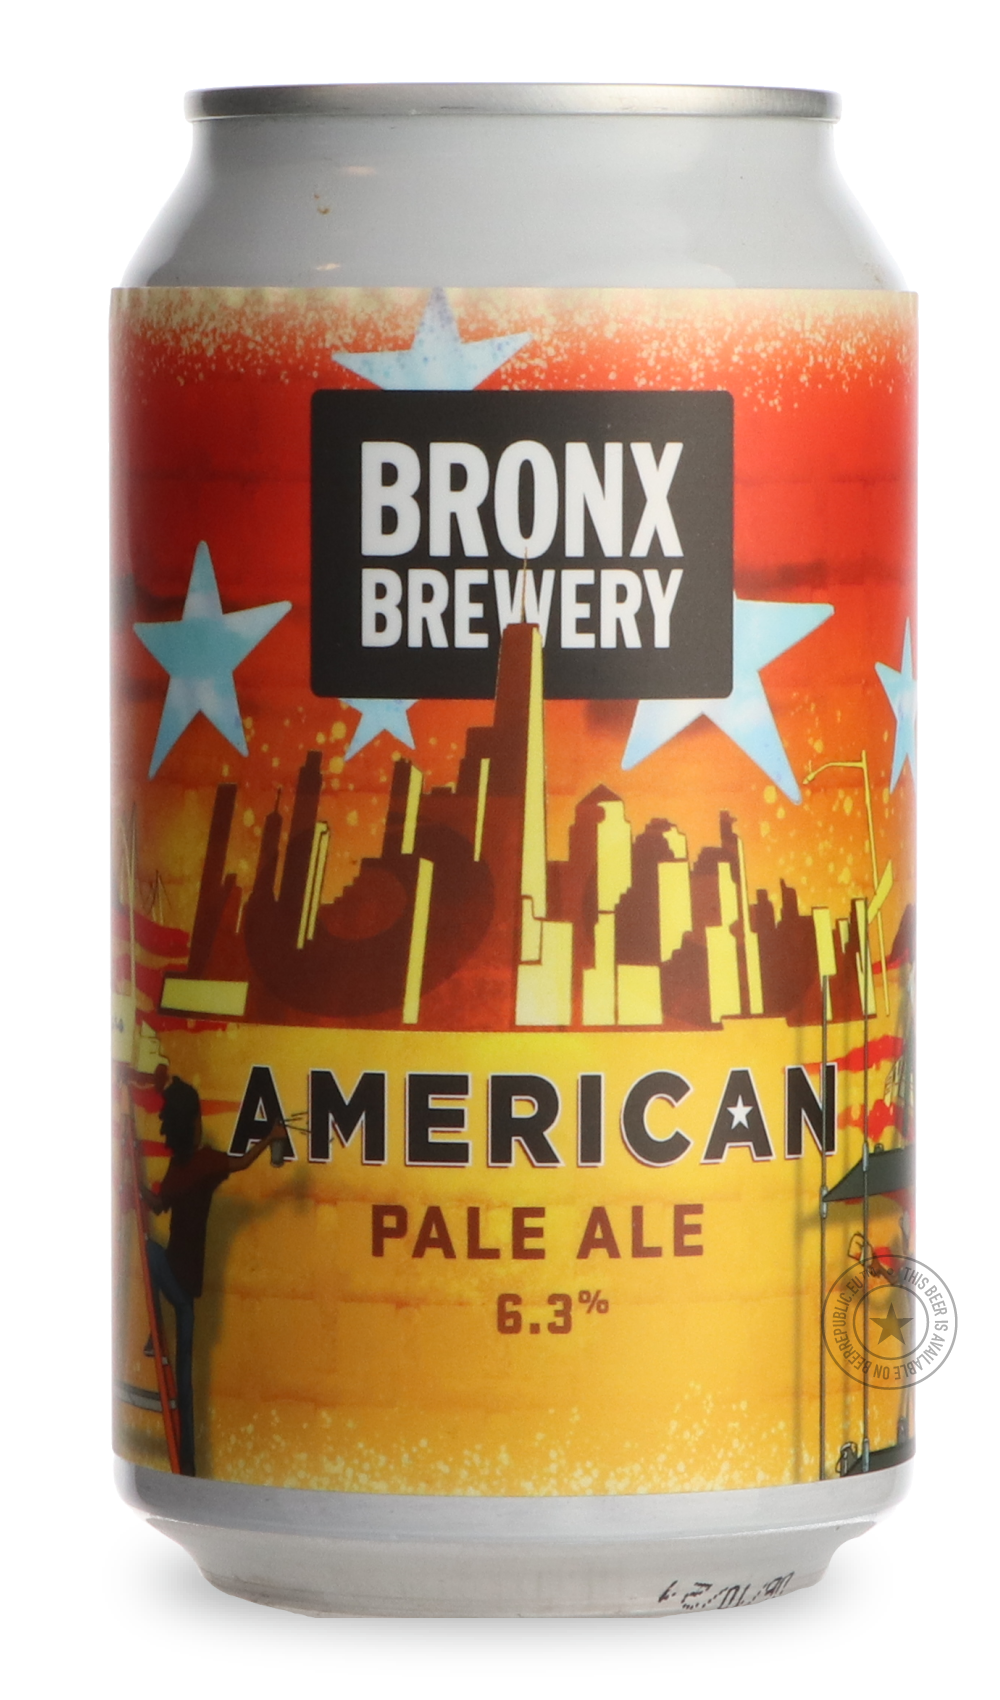 -Bronx- American Pale Ale-Pale- Only @ Beer Republic - The best online beer store for American & Canadian craft beer - Buy beer online from the USA and Canada - Bier online kopen - Amerikaans bier kopen - Craft beer store - Craft beer kopen - Amerikanisch bier kaufen - Bier online kaufen - Acheter biere online - IPA - Stout - Porter - New England IPA - Hazy IPA - Imperial Stout - Barrel Aged - Barrel Aged Imperial Stout - Brown - Dark beer - Blond - Blonde - Pilsner - Lager - Wheat - Weizen - Amber - Barley